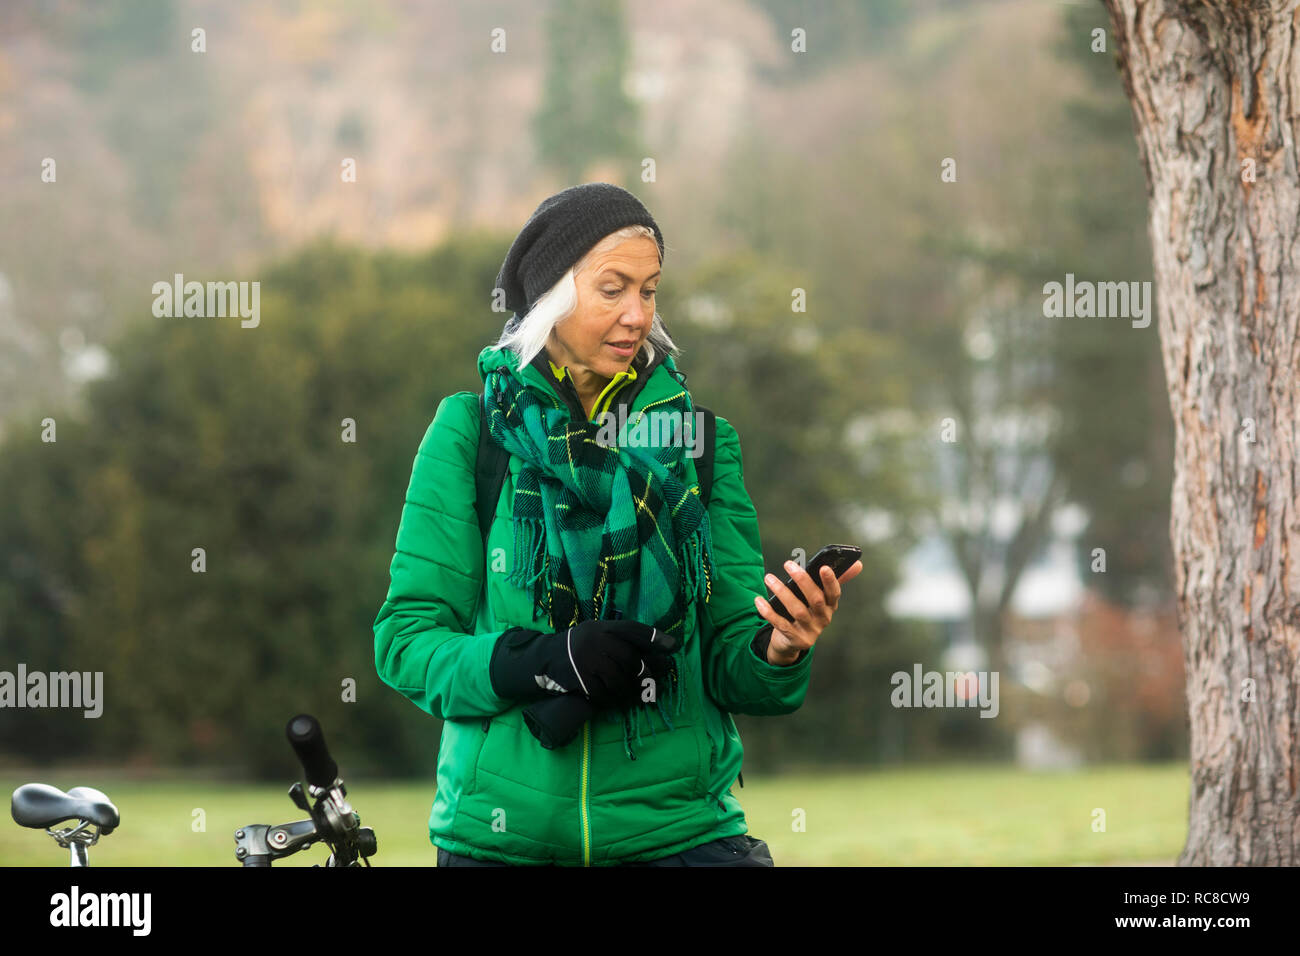 Mature woman using smartphone in park Stock Photo